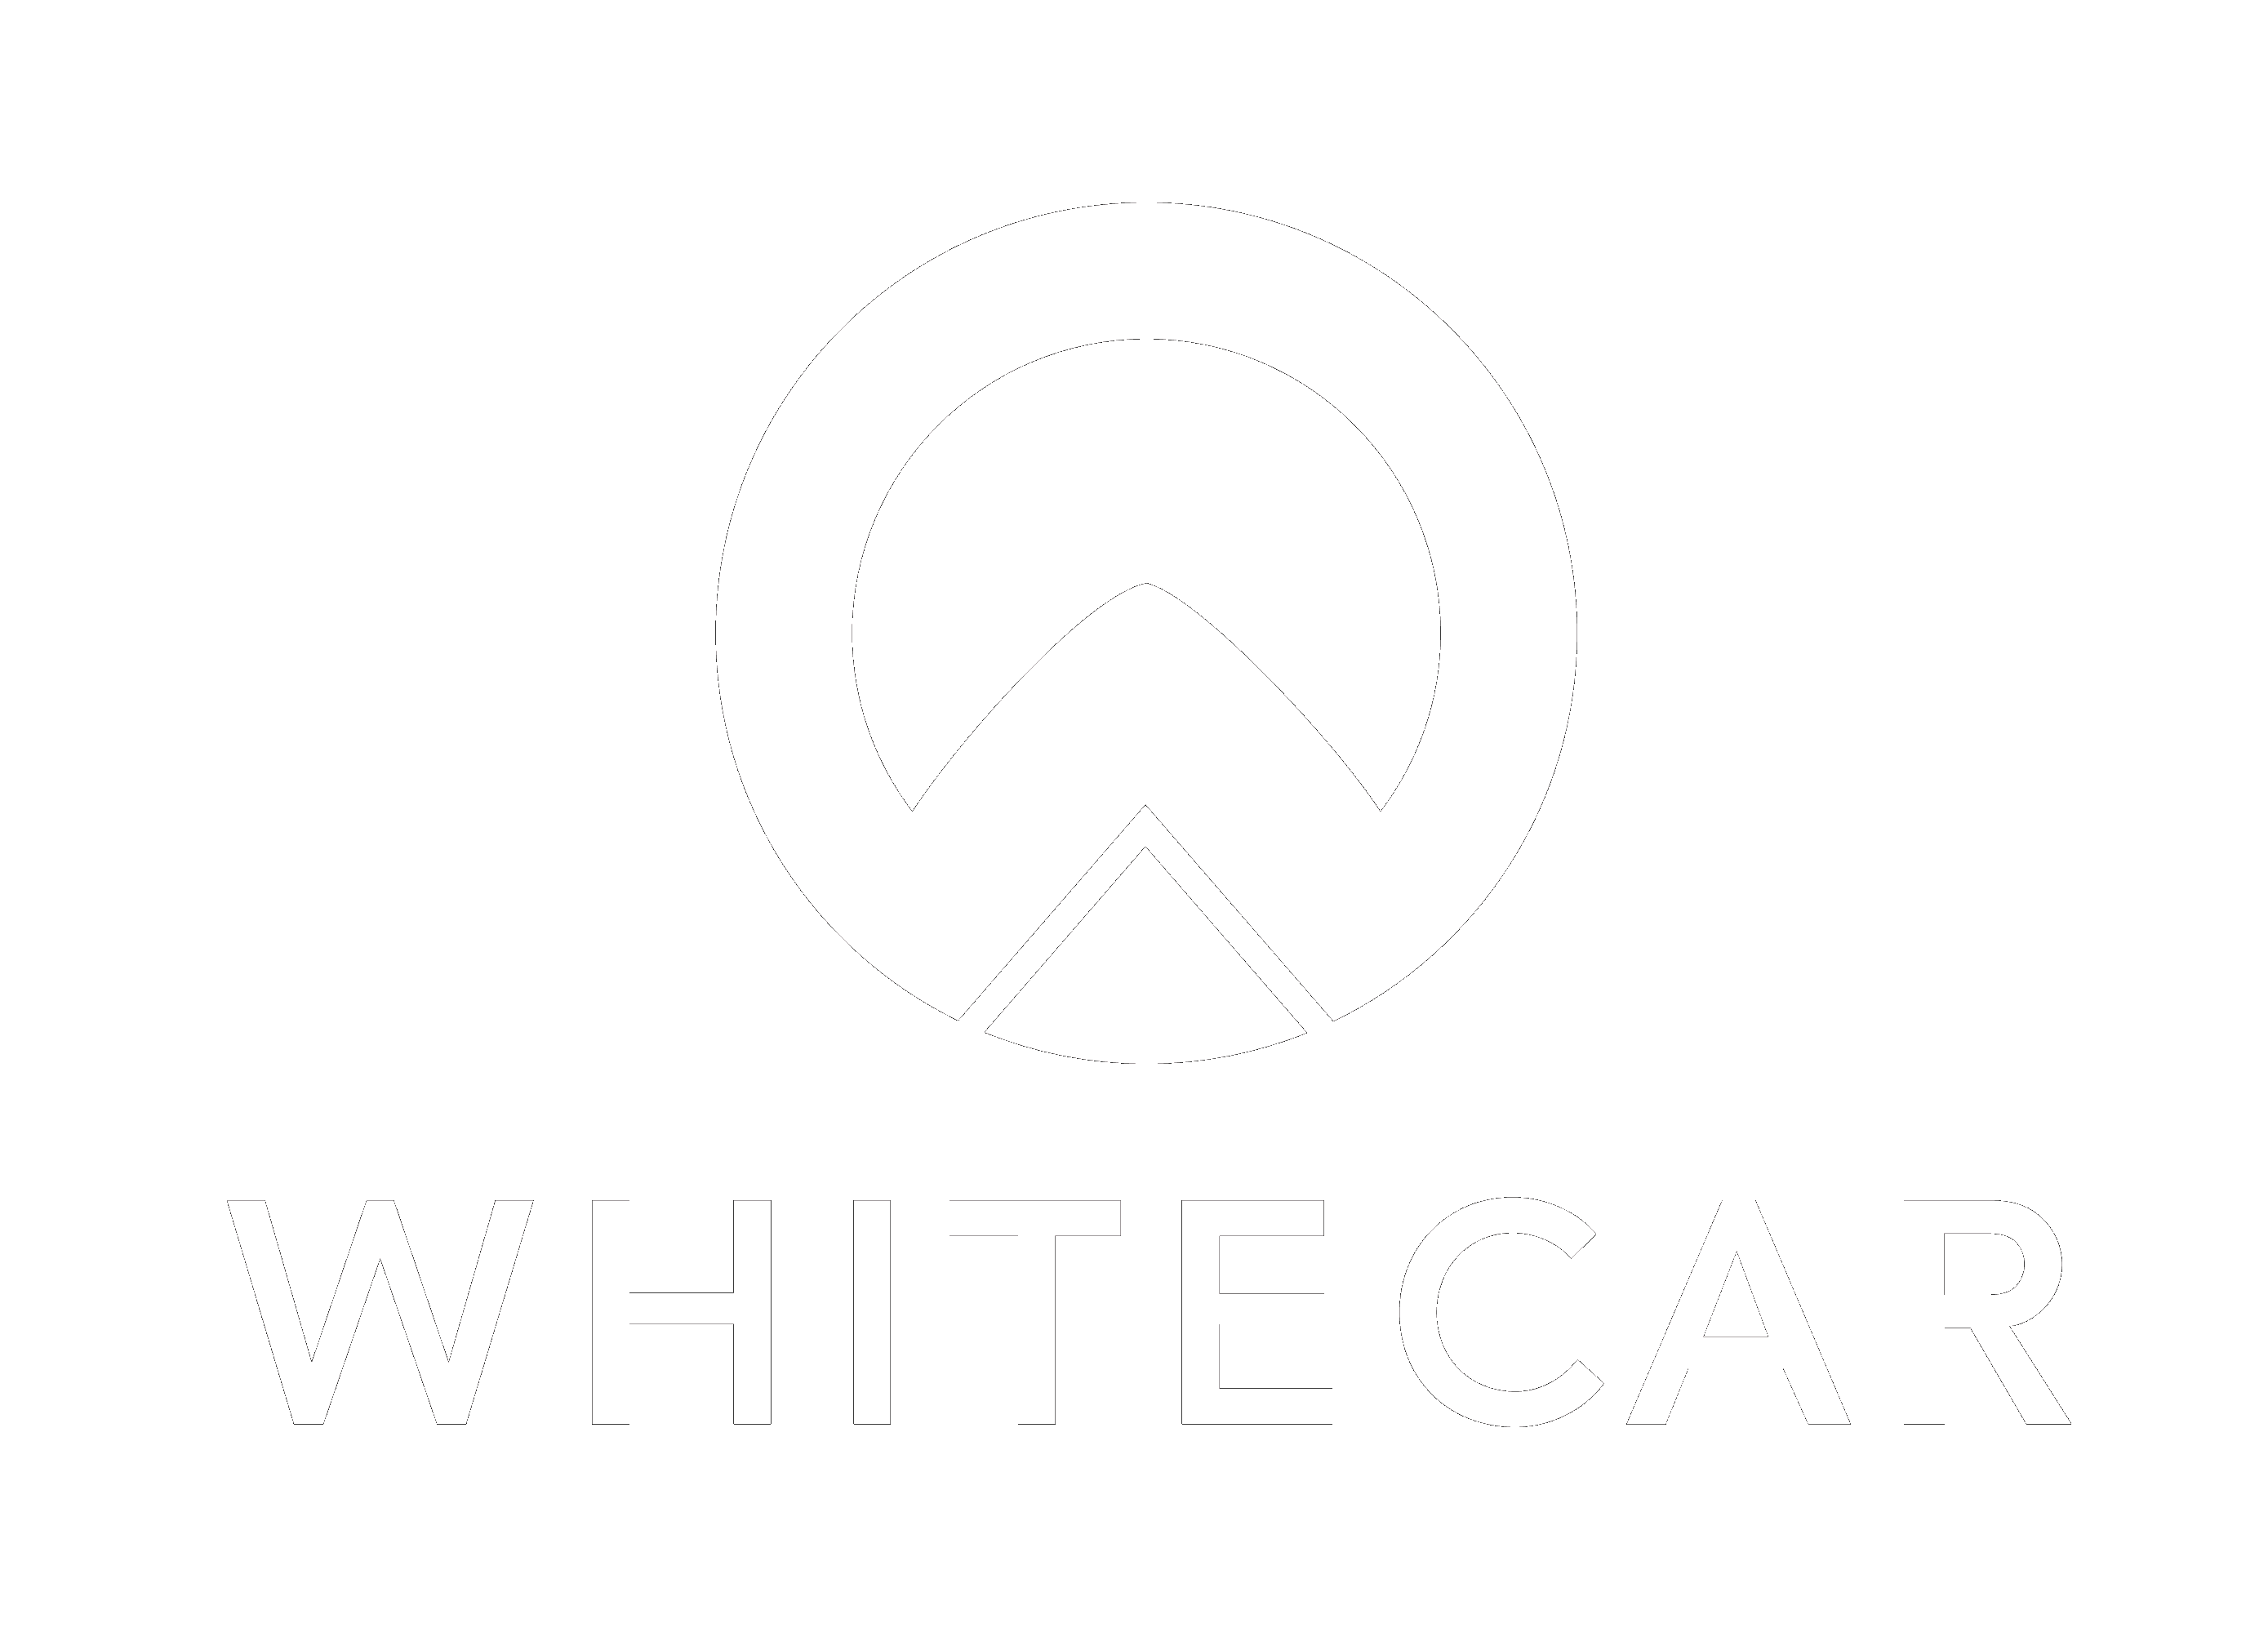 Black and White Car Logo - Hire a Tesla with Whitecar | Car rental across the UK | Book Online